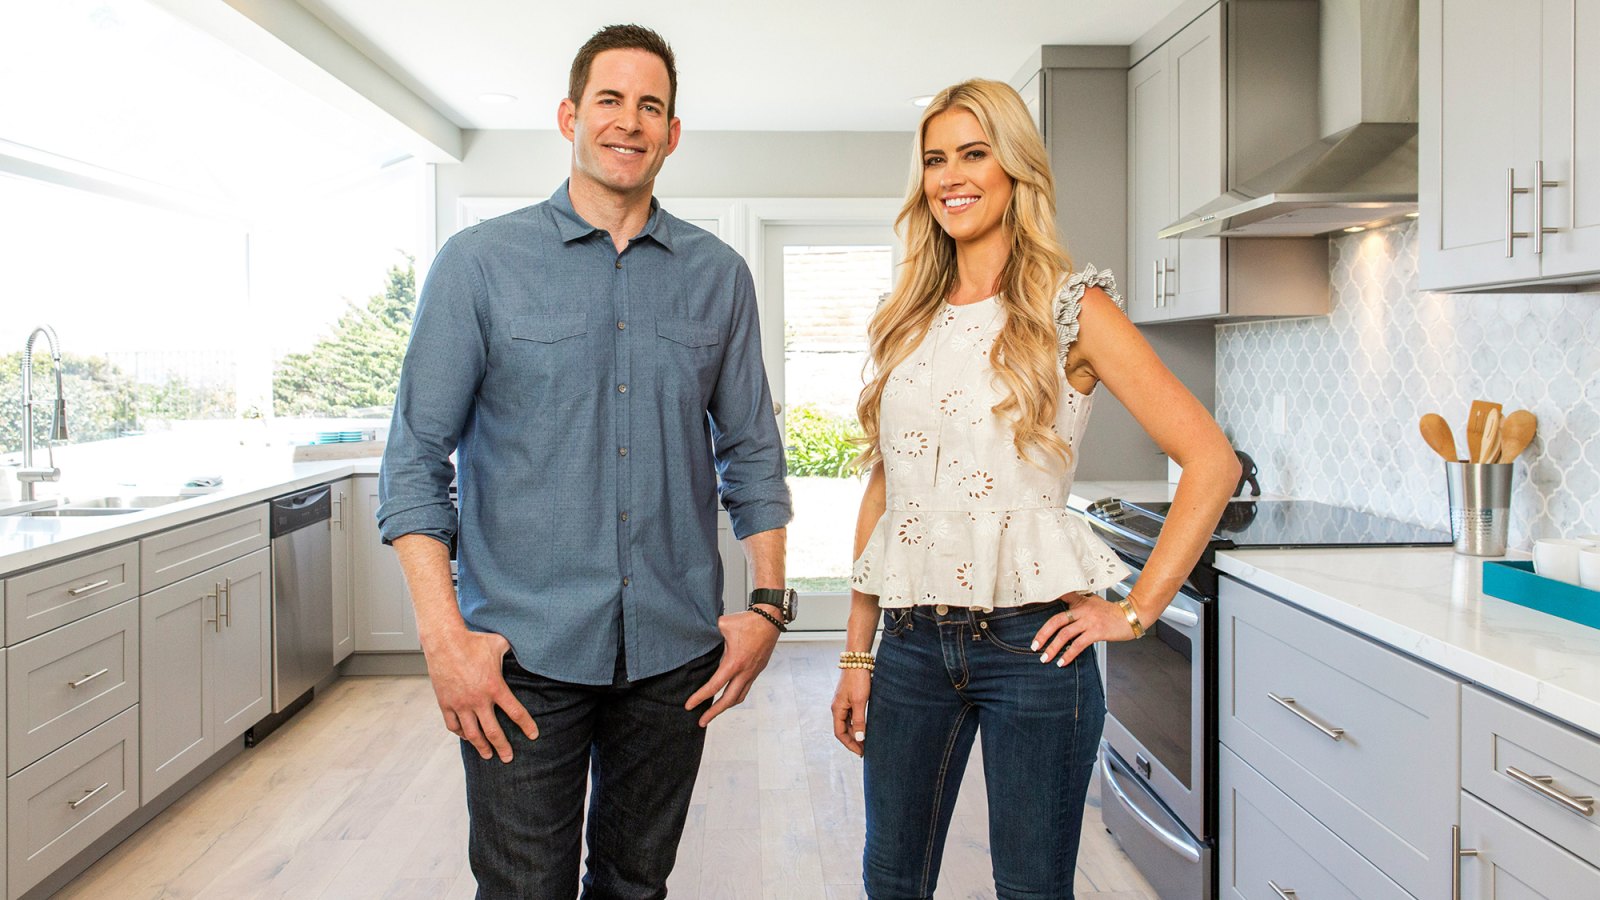 Christina Haack and Ex-Husband Tarek El Moussa Will Team Up for 1 Last 'Flip Or Flop' Project in Kitchen of Renovated Kitchen